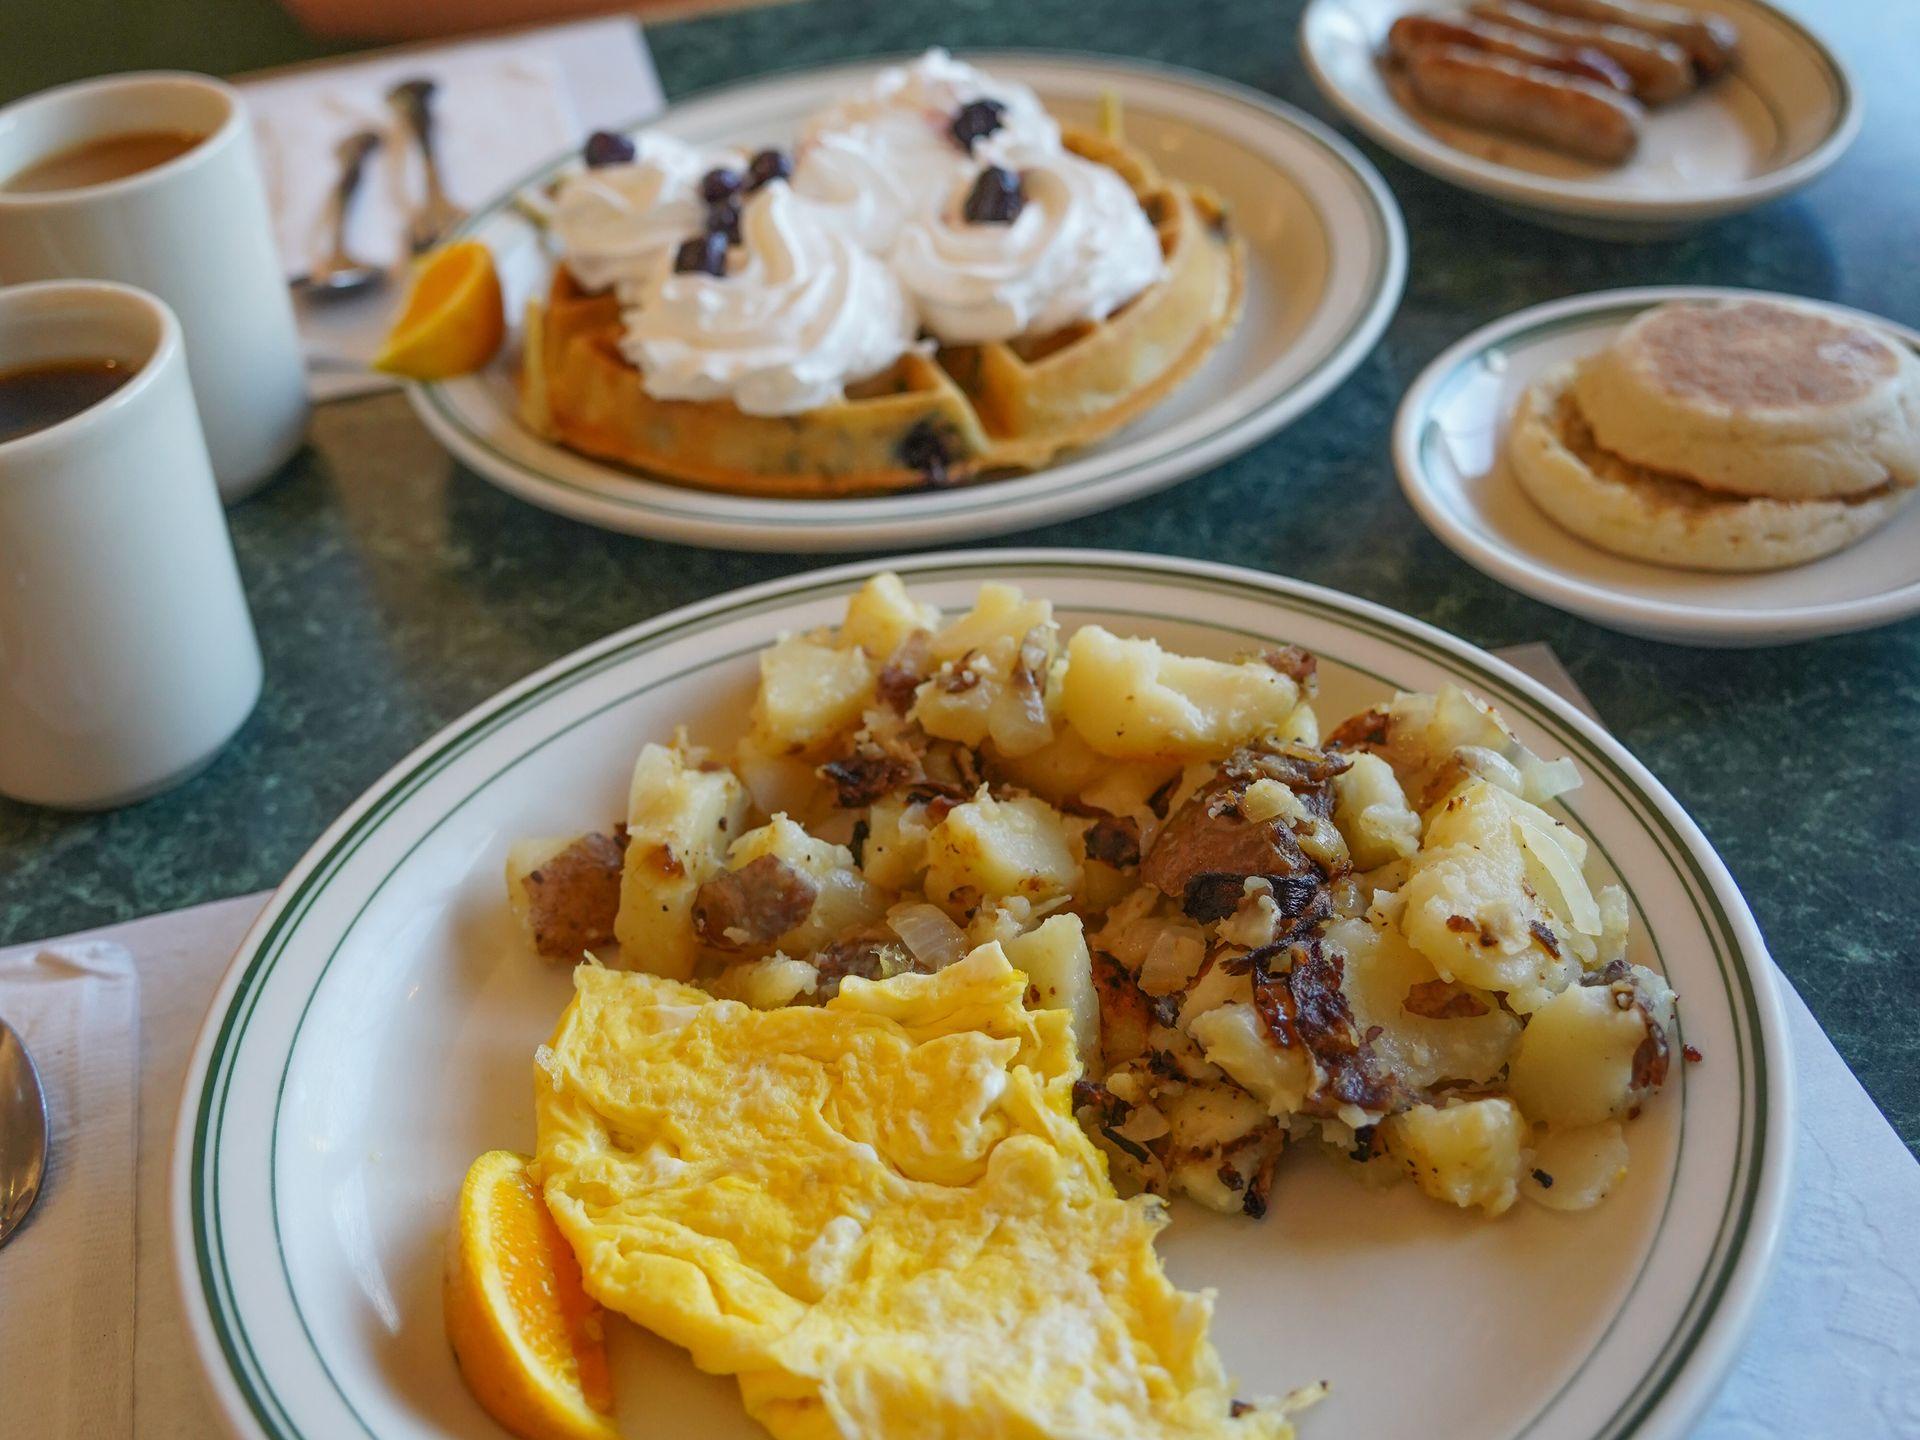 A close up view of a plate with hash browns, scrambled eggs and an orange slice. In the background, there is a waffle with whipped cream, an english muffin and sausage links.